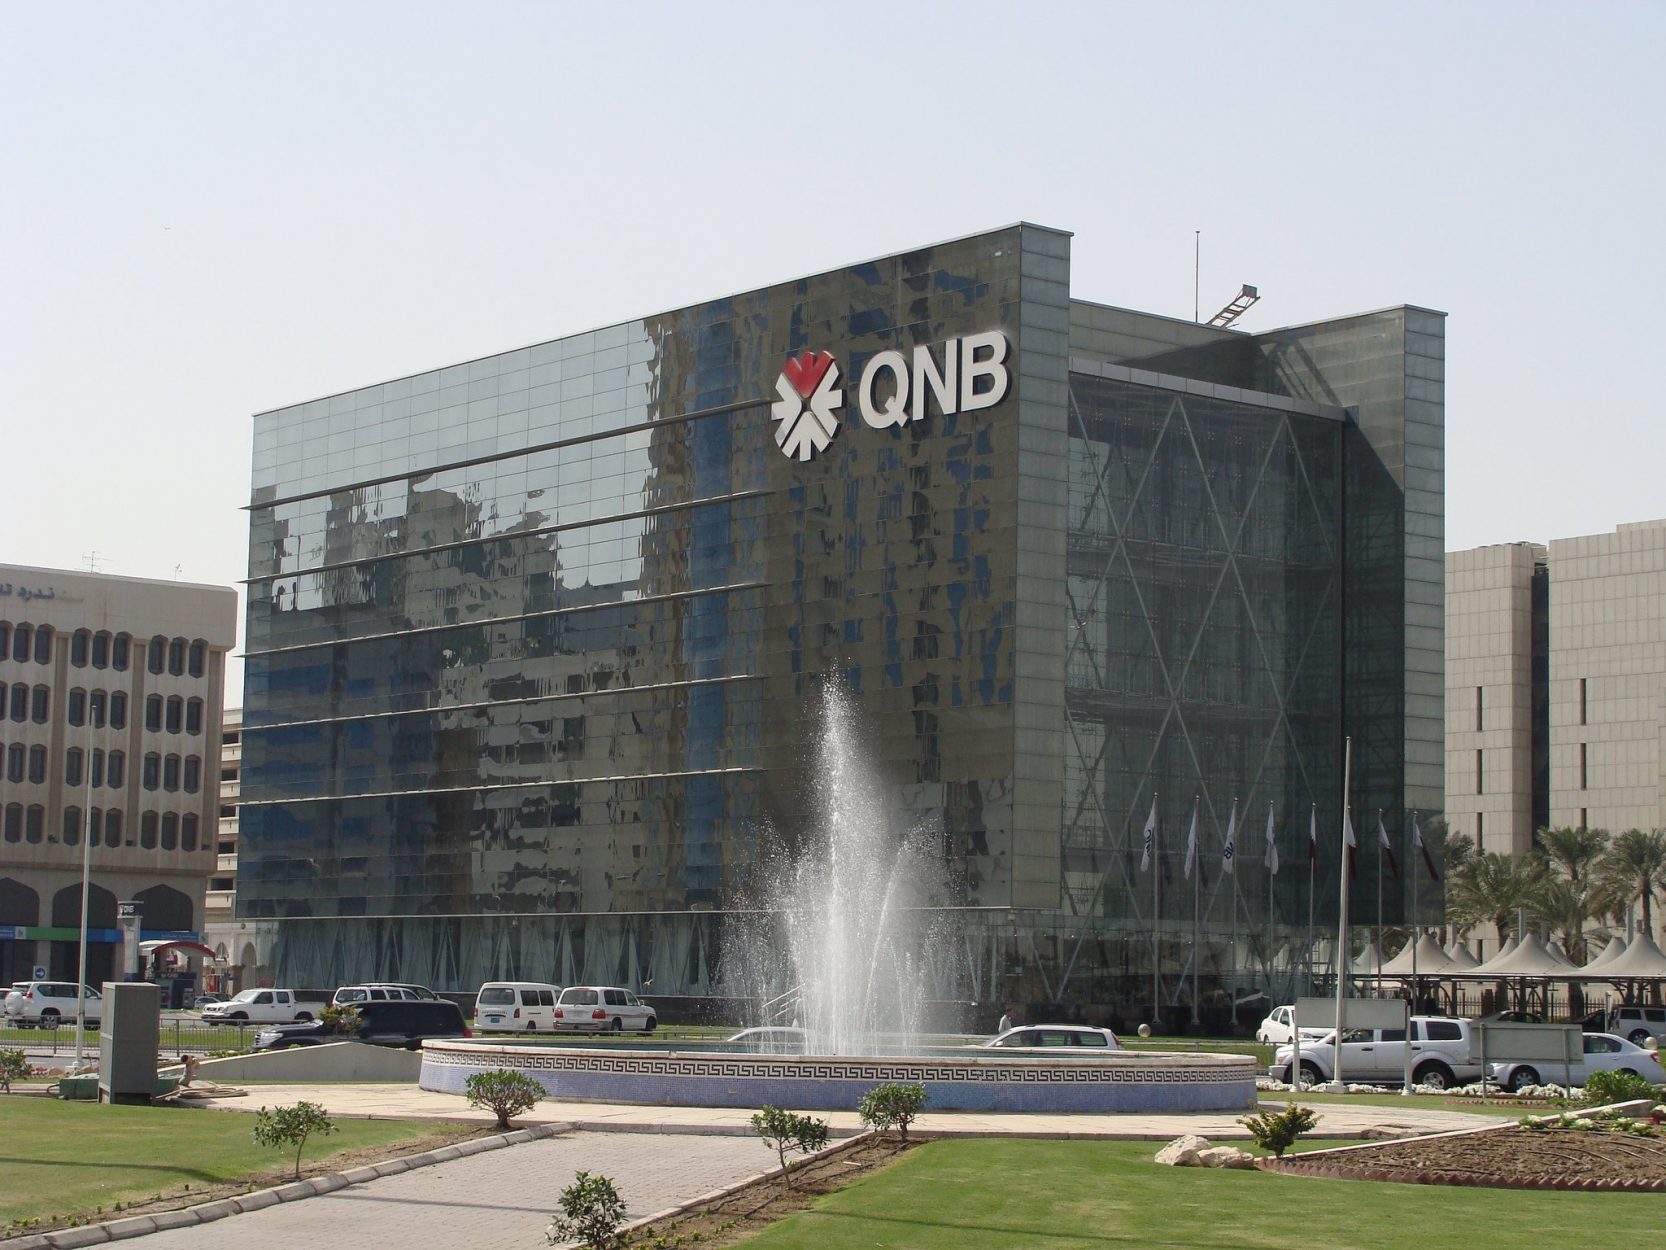 QNB: Real Estate in Advanced Economies to Face Pressure Due to Tighter Monetary Policy